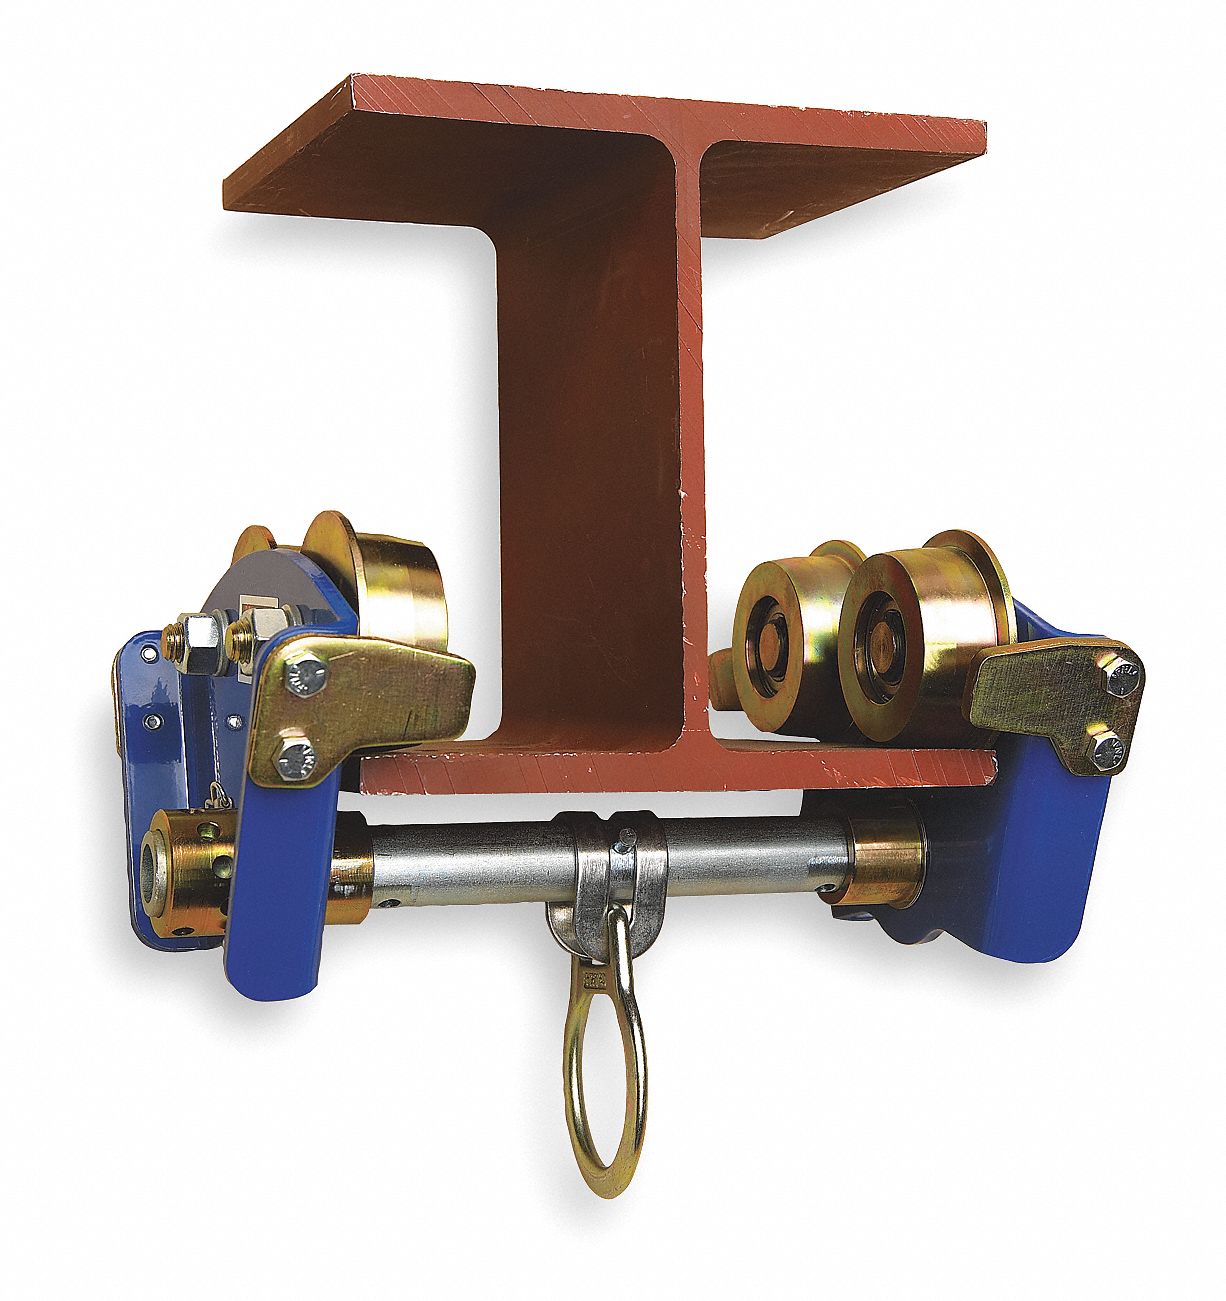 Gold Fits Beam Flanges 3-8 In Width Up To 11/16 Thick 3M DBI-SALA 2103143 Trolley For I-Beam For Use w/Self Retracting Lifeline 